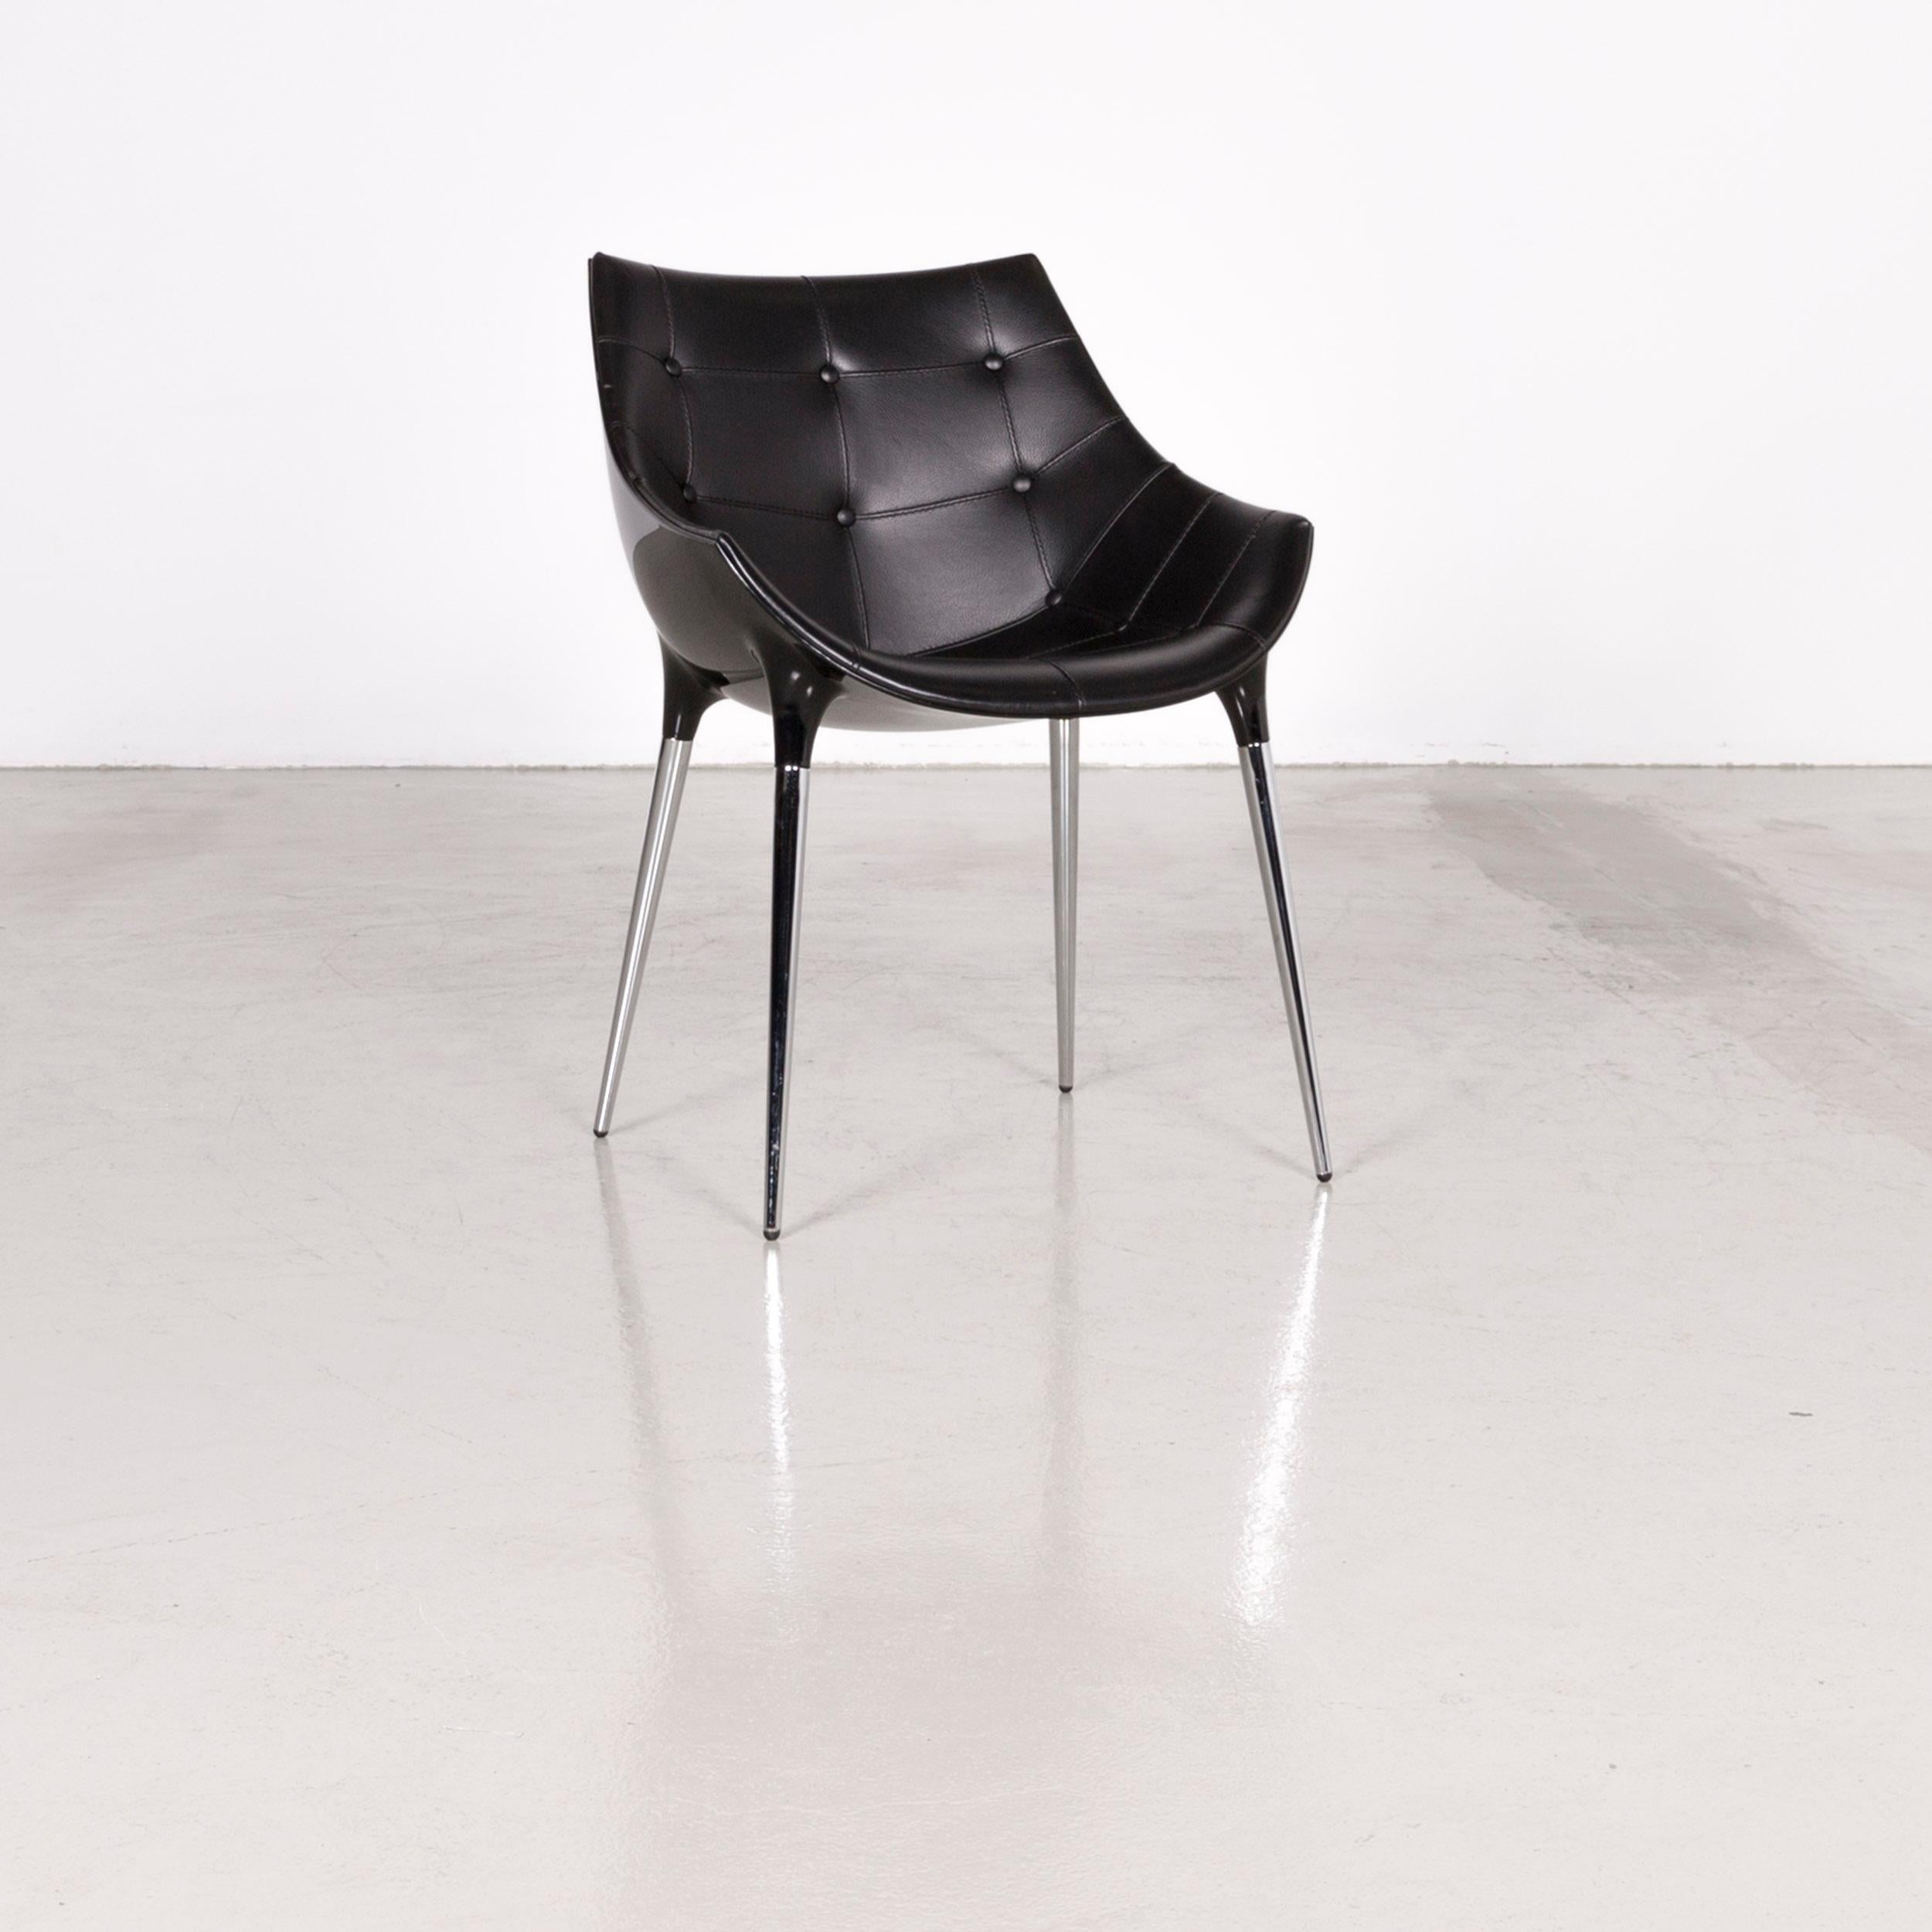 Cassina passion leather armchair set black by Philippe Starck.